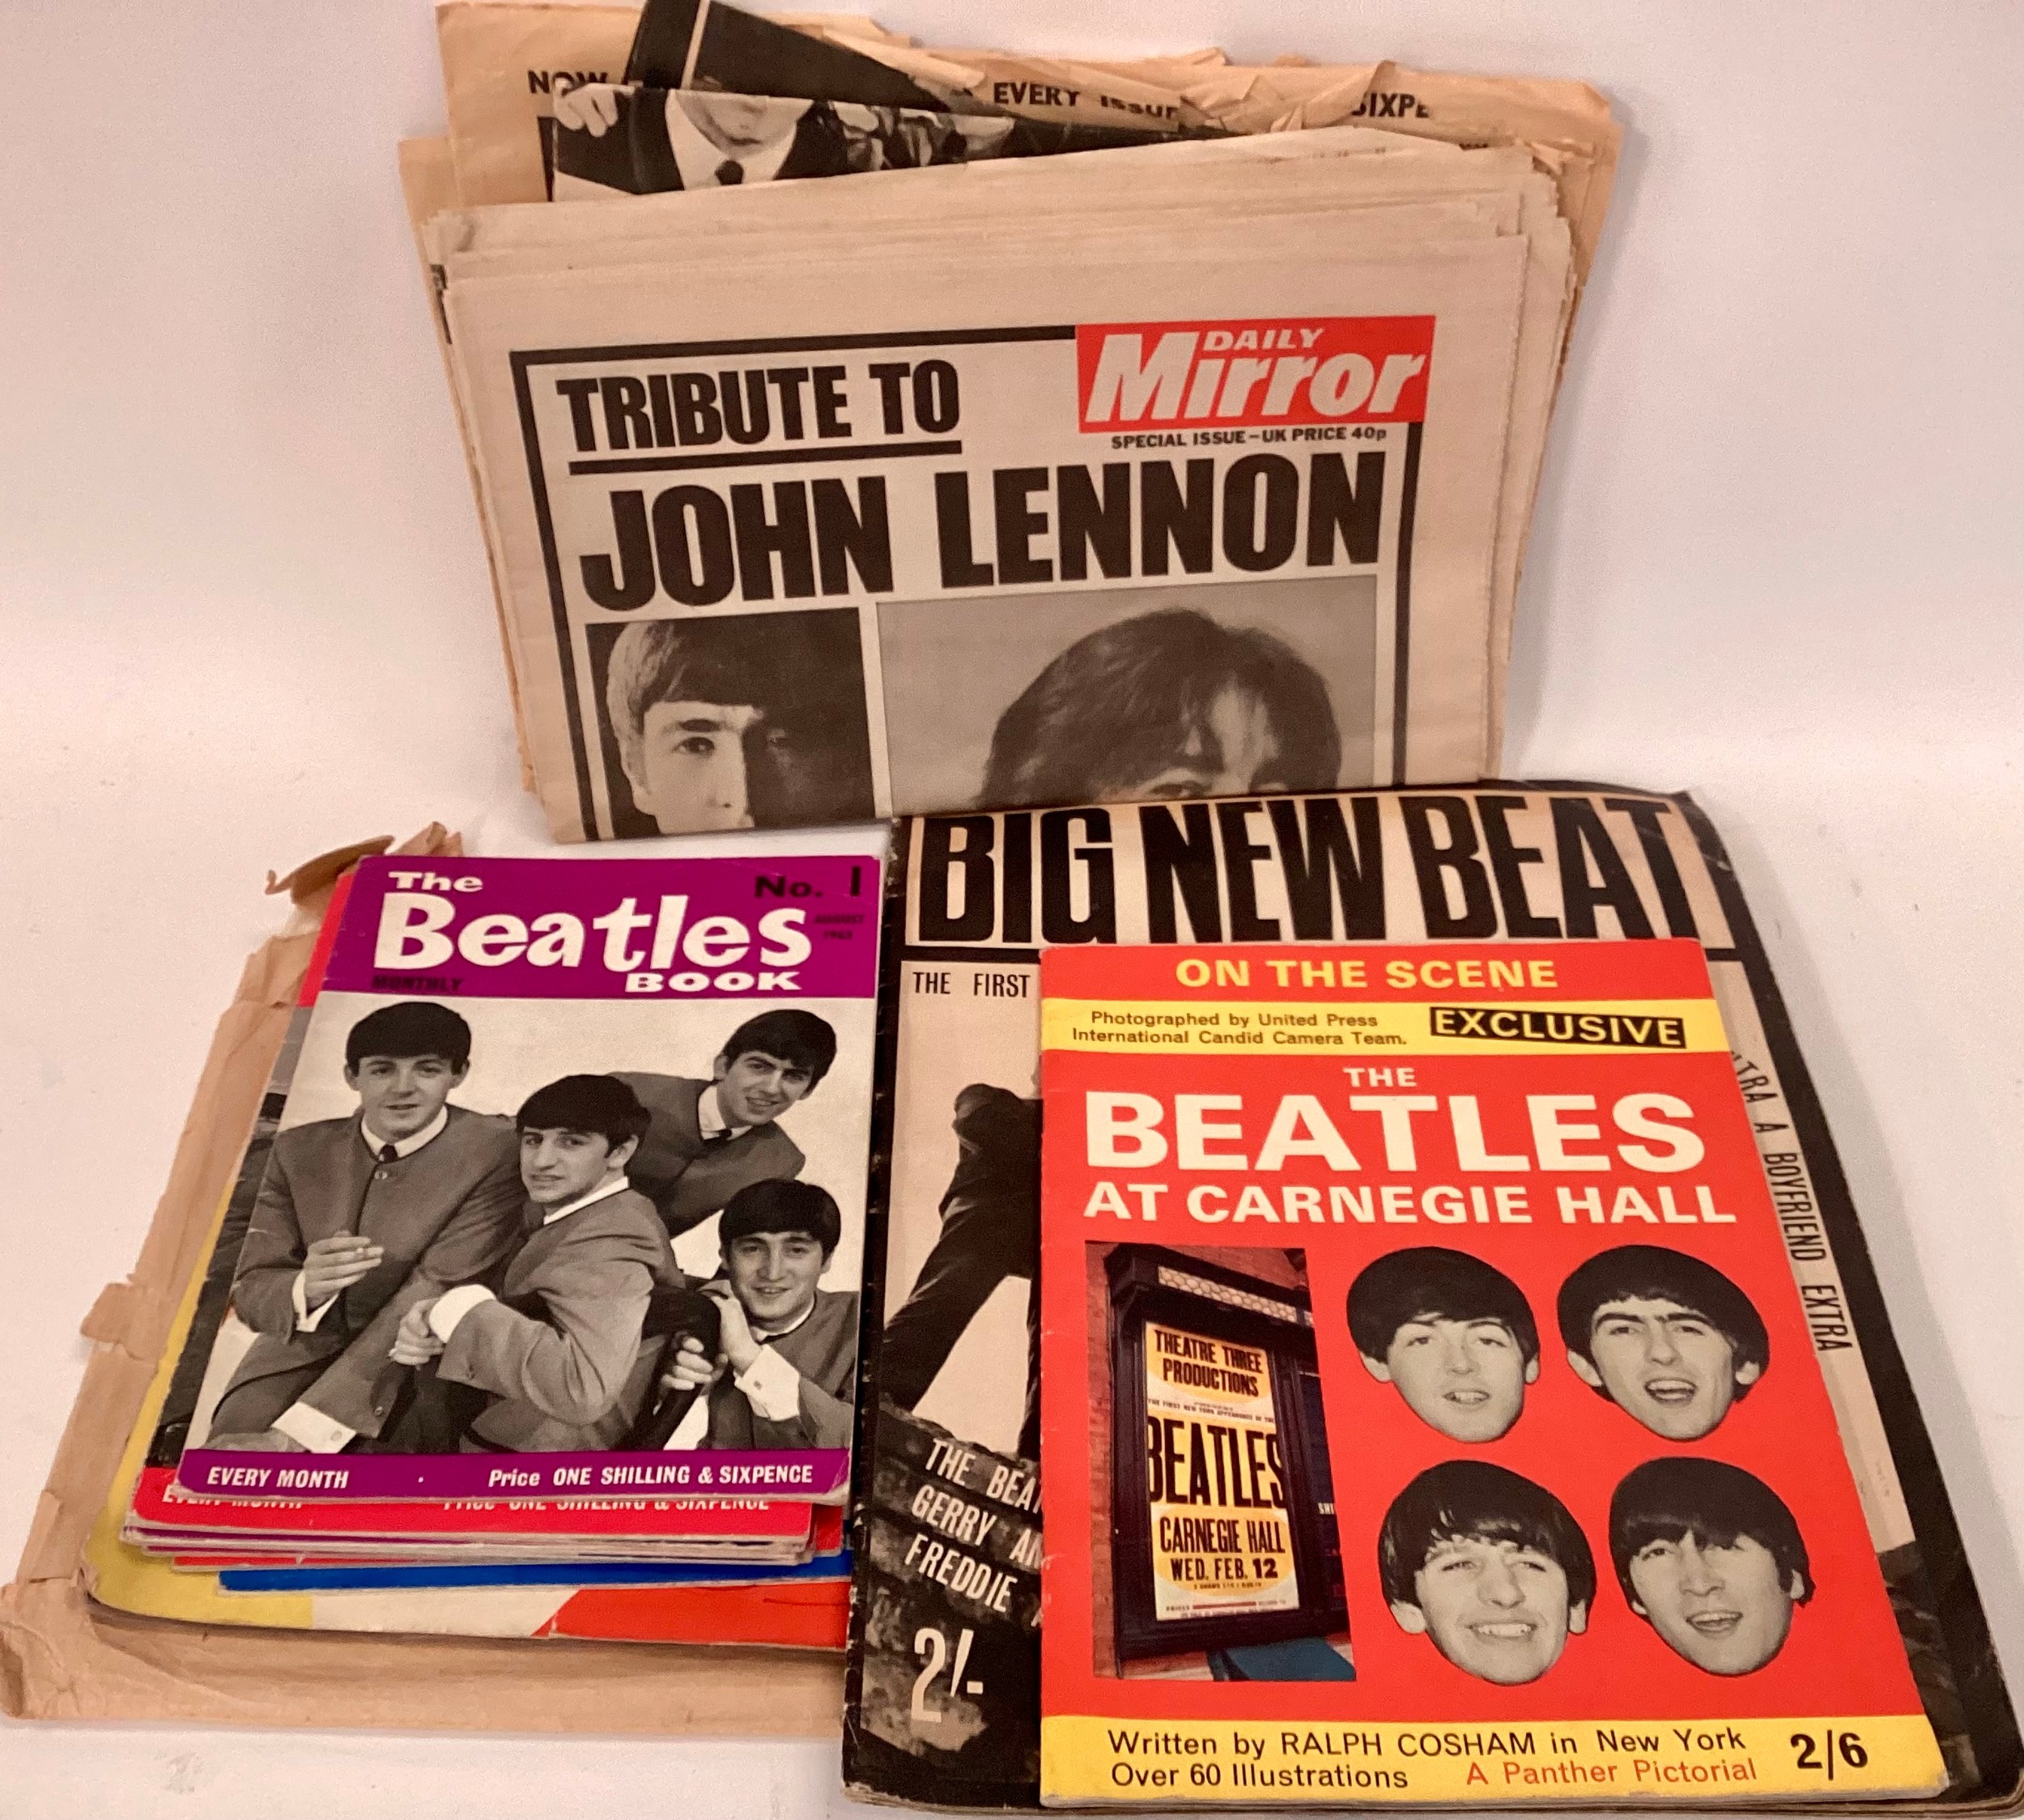 COLLECTION OF EPHEMERA FROM THE BEATLES. Nice collection of various items in print from The Beatles.